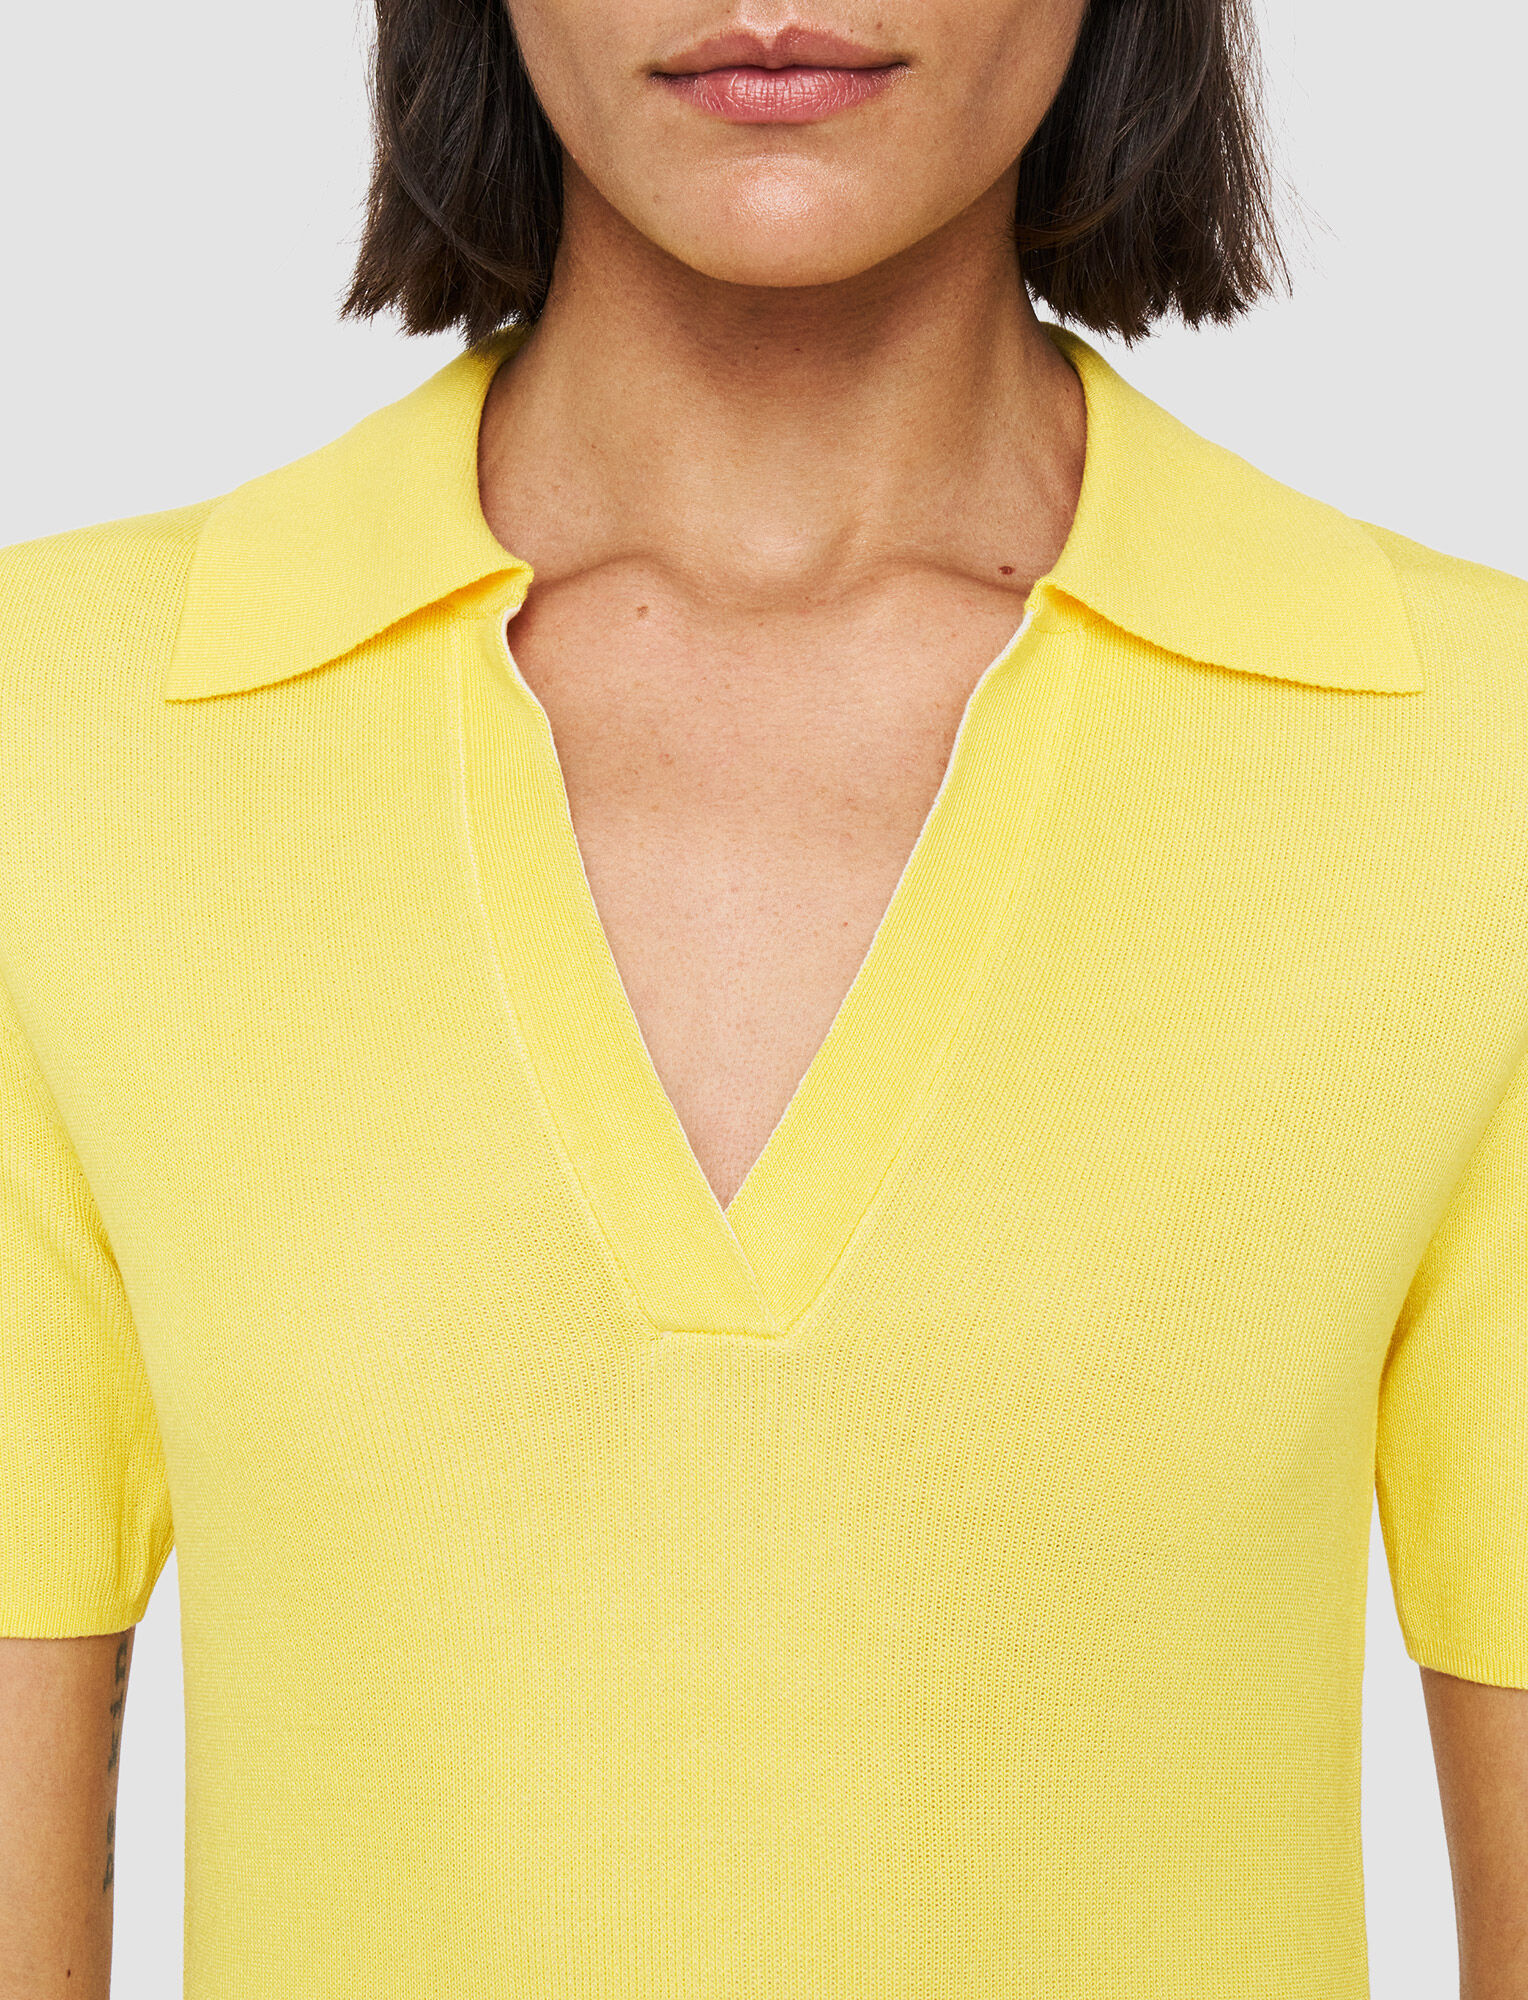 Joseph, Plated Knit Polo Top, in Sunshine Combo